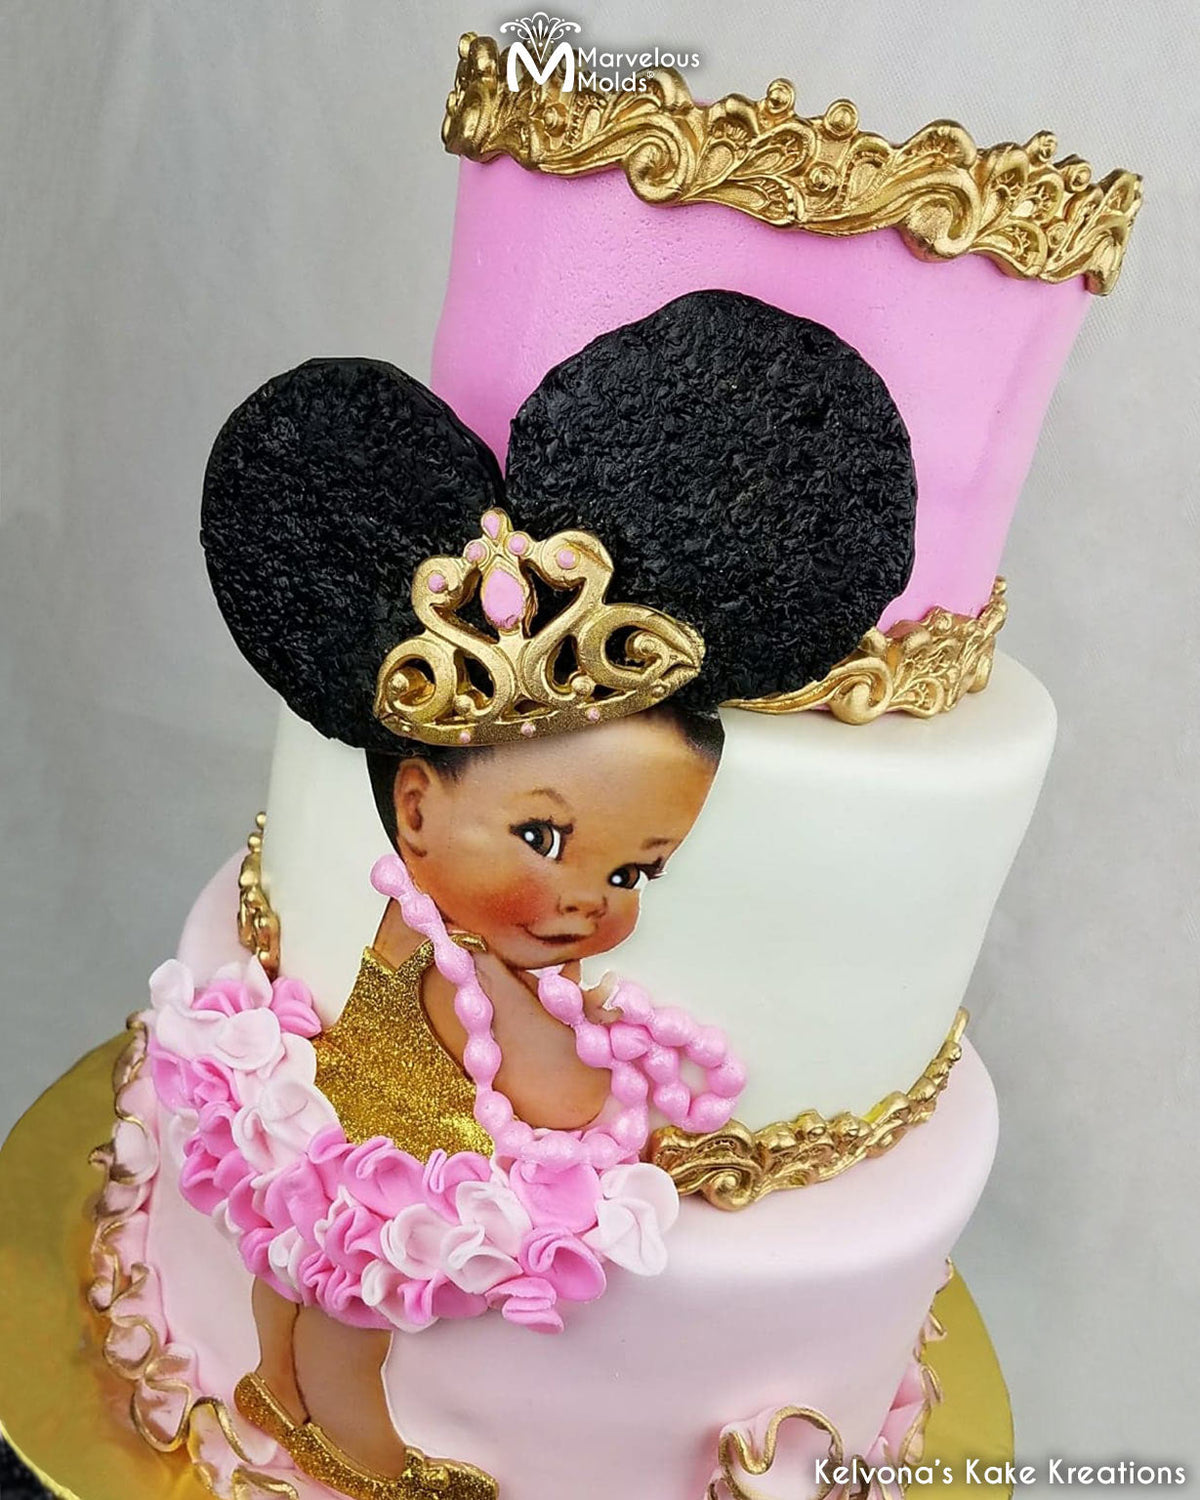 Princess Birthday Cake Decorated with Marvelous Molds Mini Majestic Tiara Silicone Mold